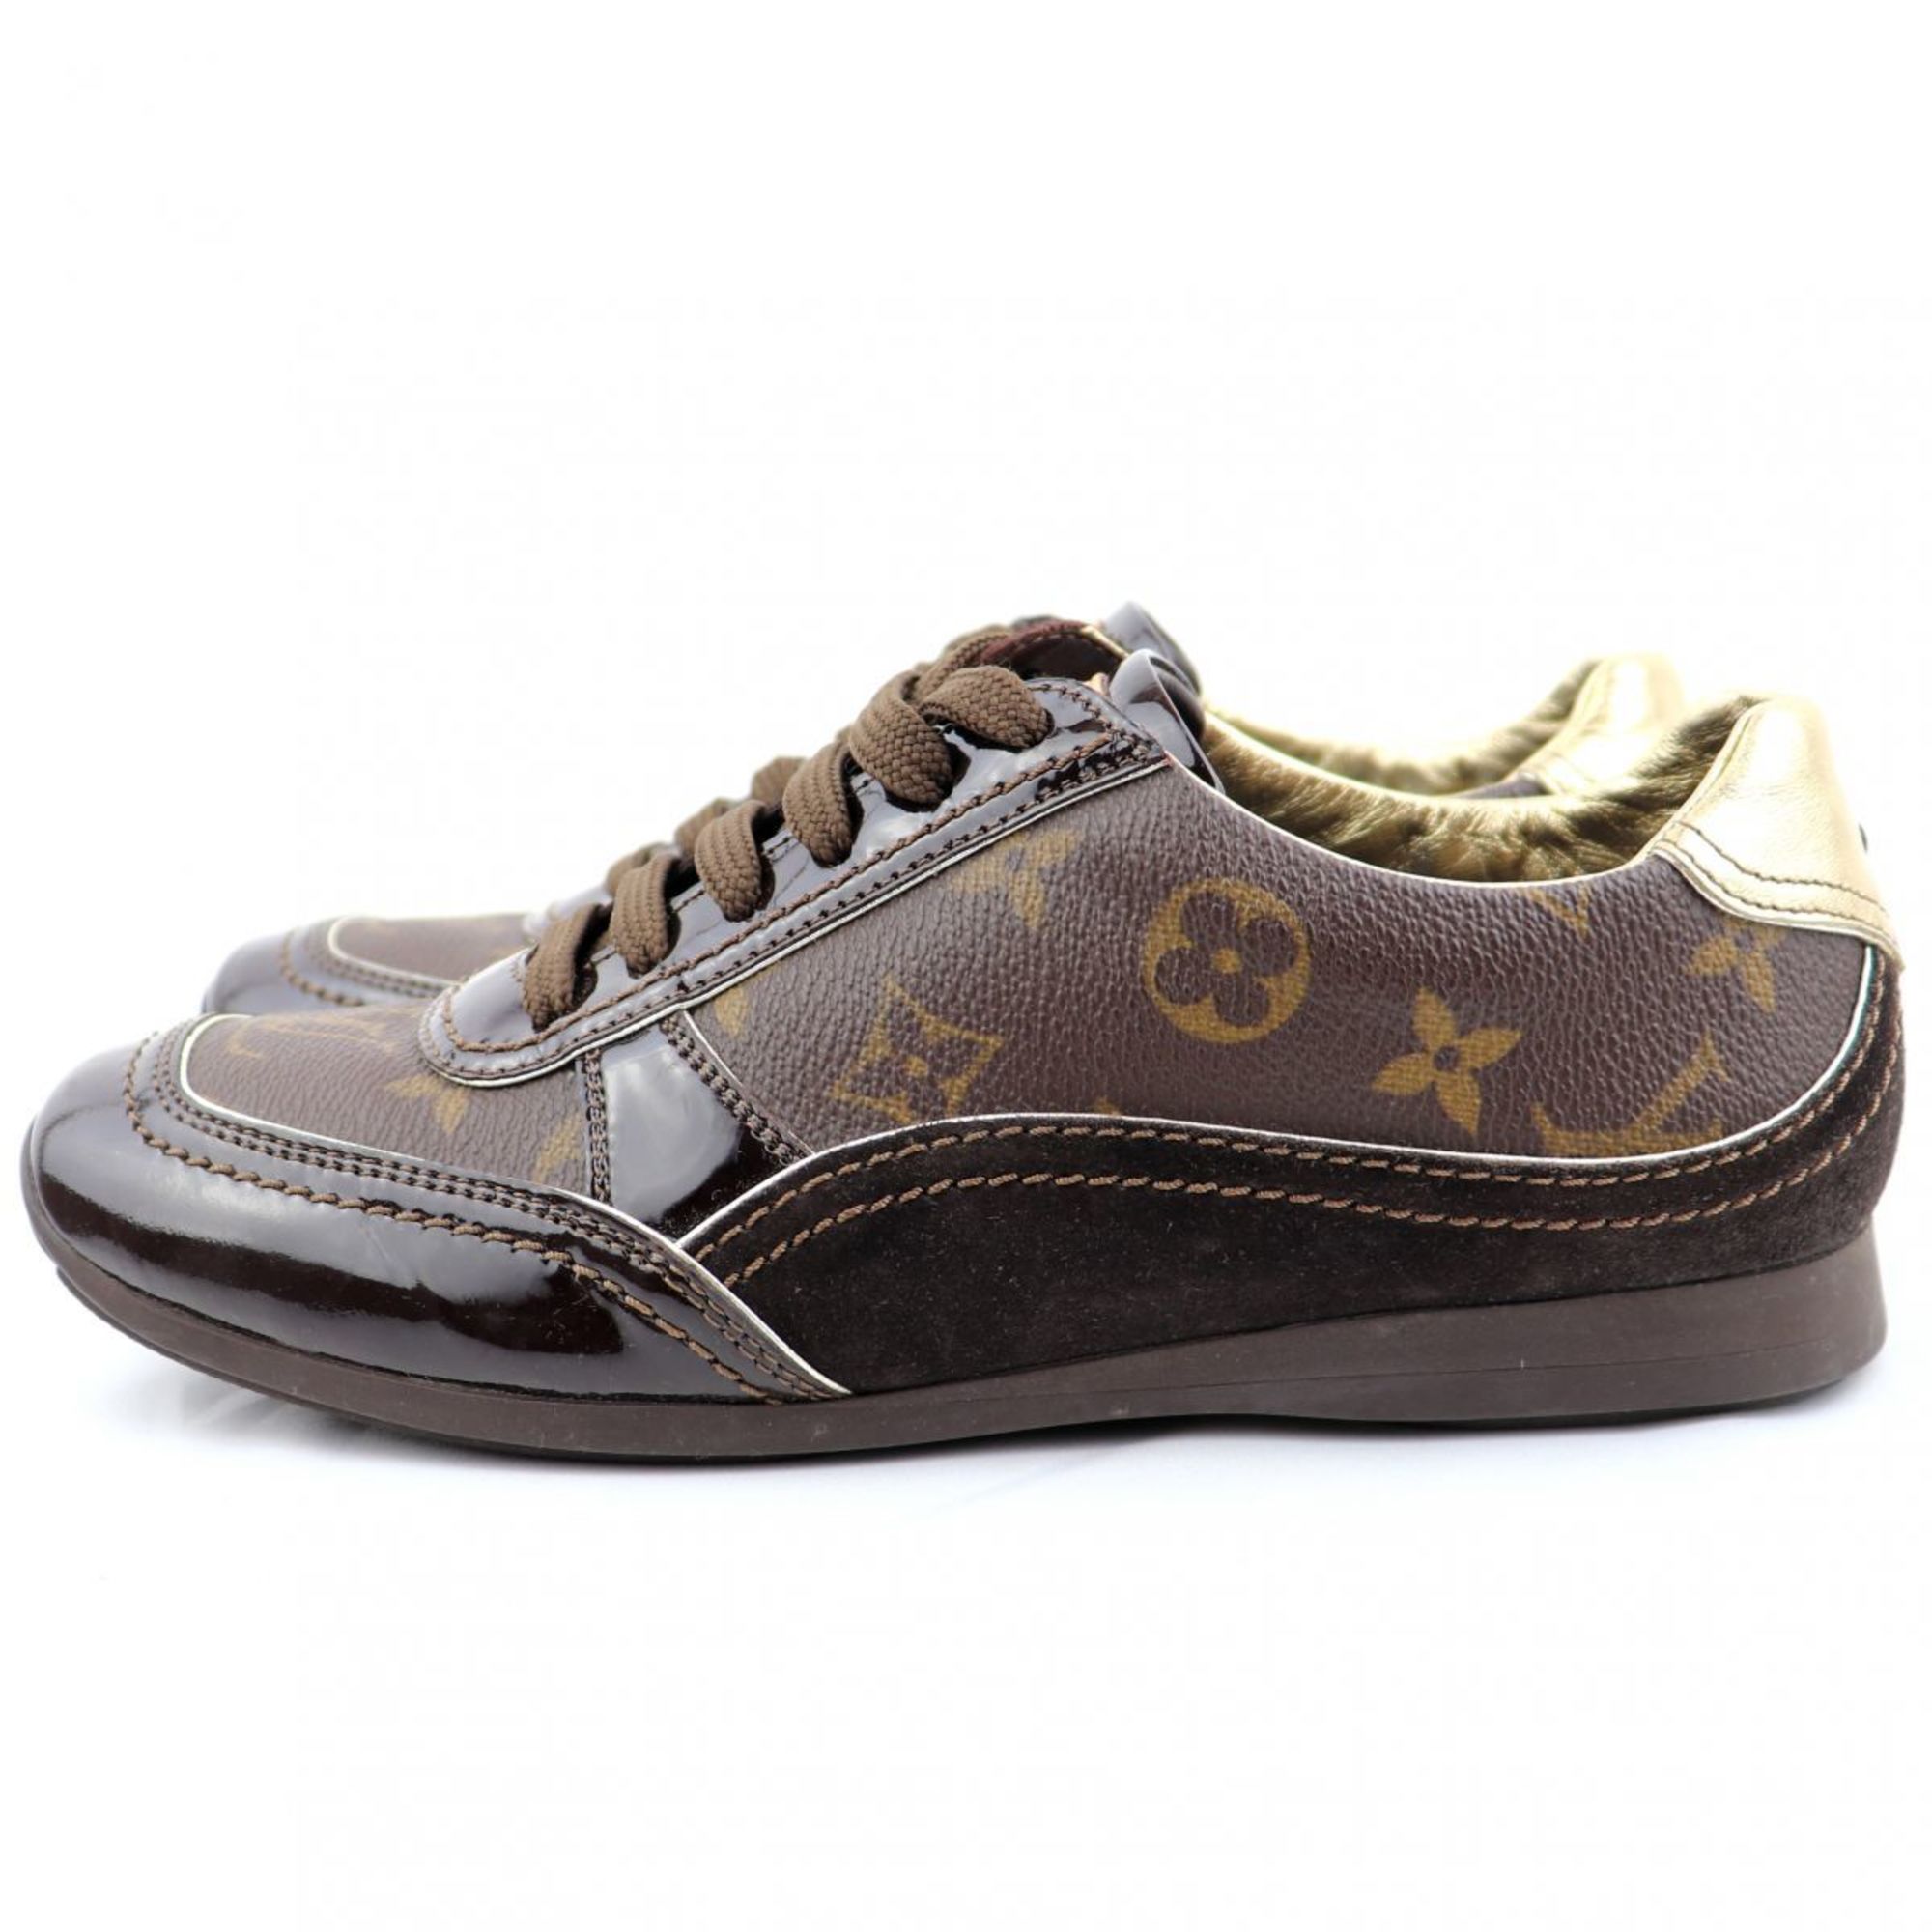 Louis Vuitton Monogram Low Cut Sneakers Women's Brown 36.5 Suede Leather x Patent